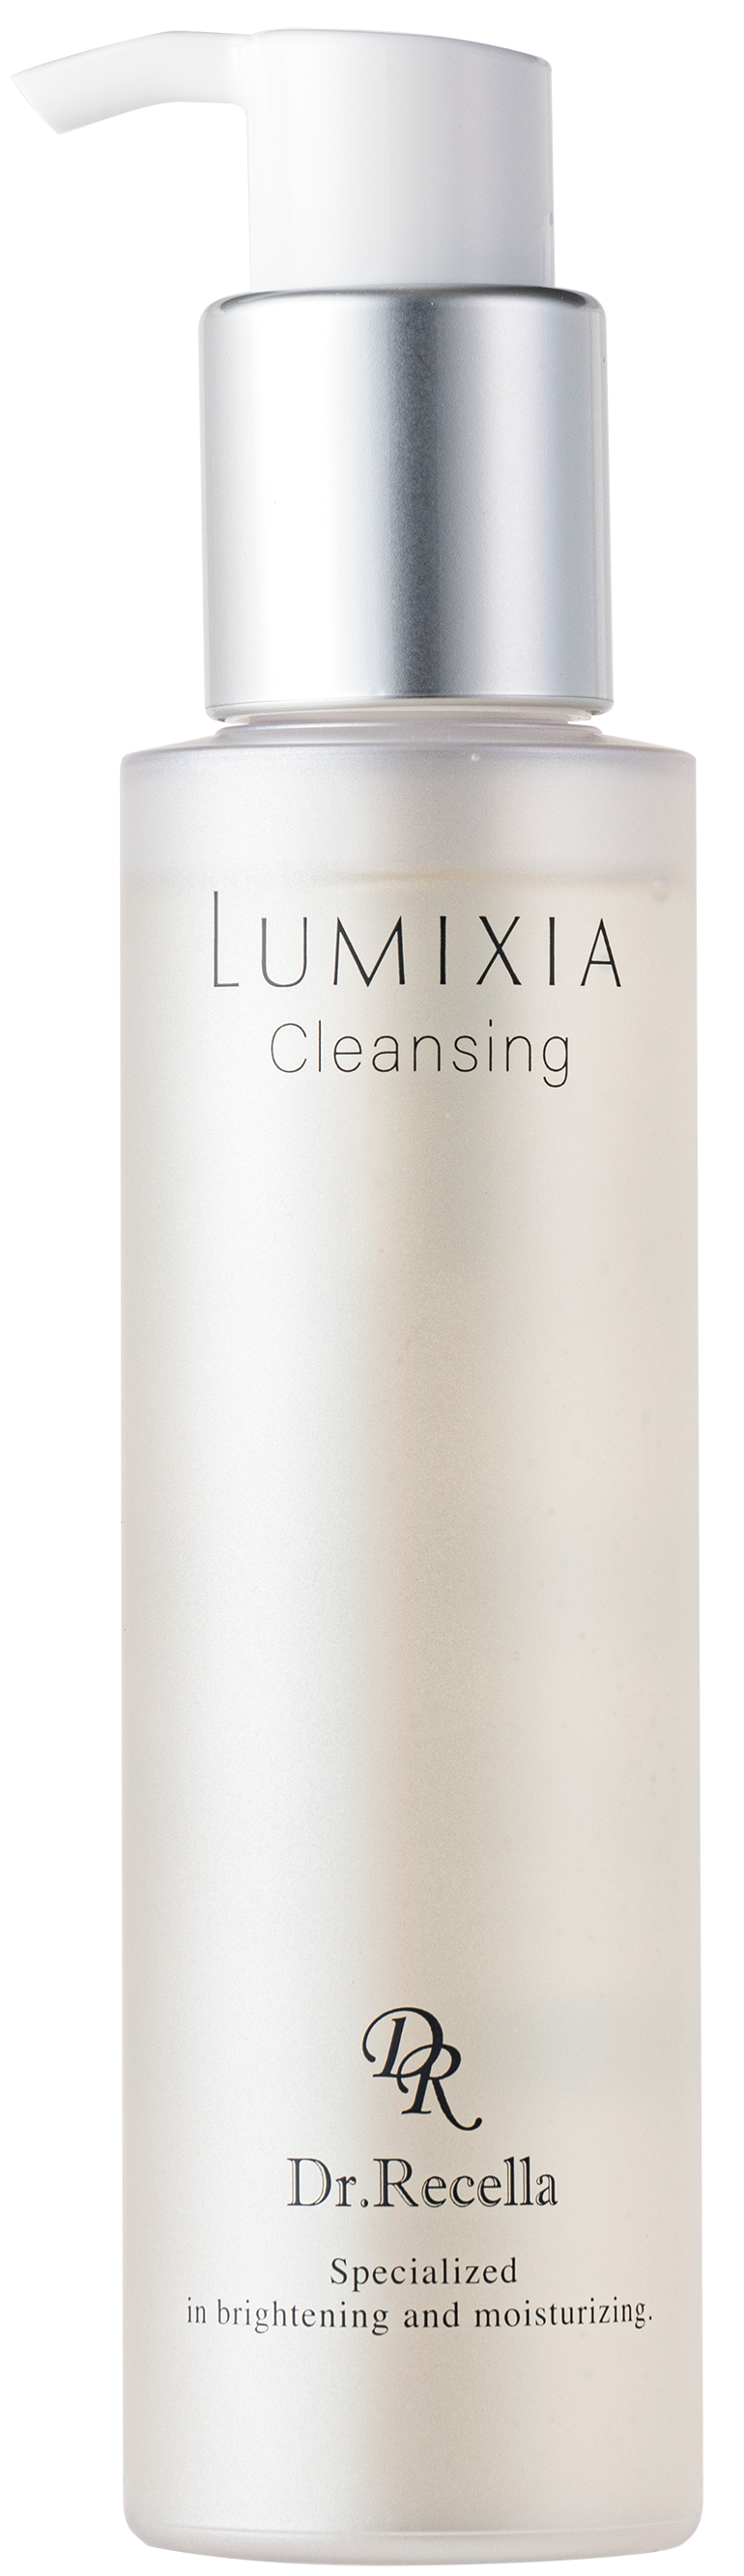 LUMIXIA Cleansing